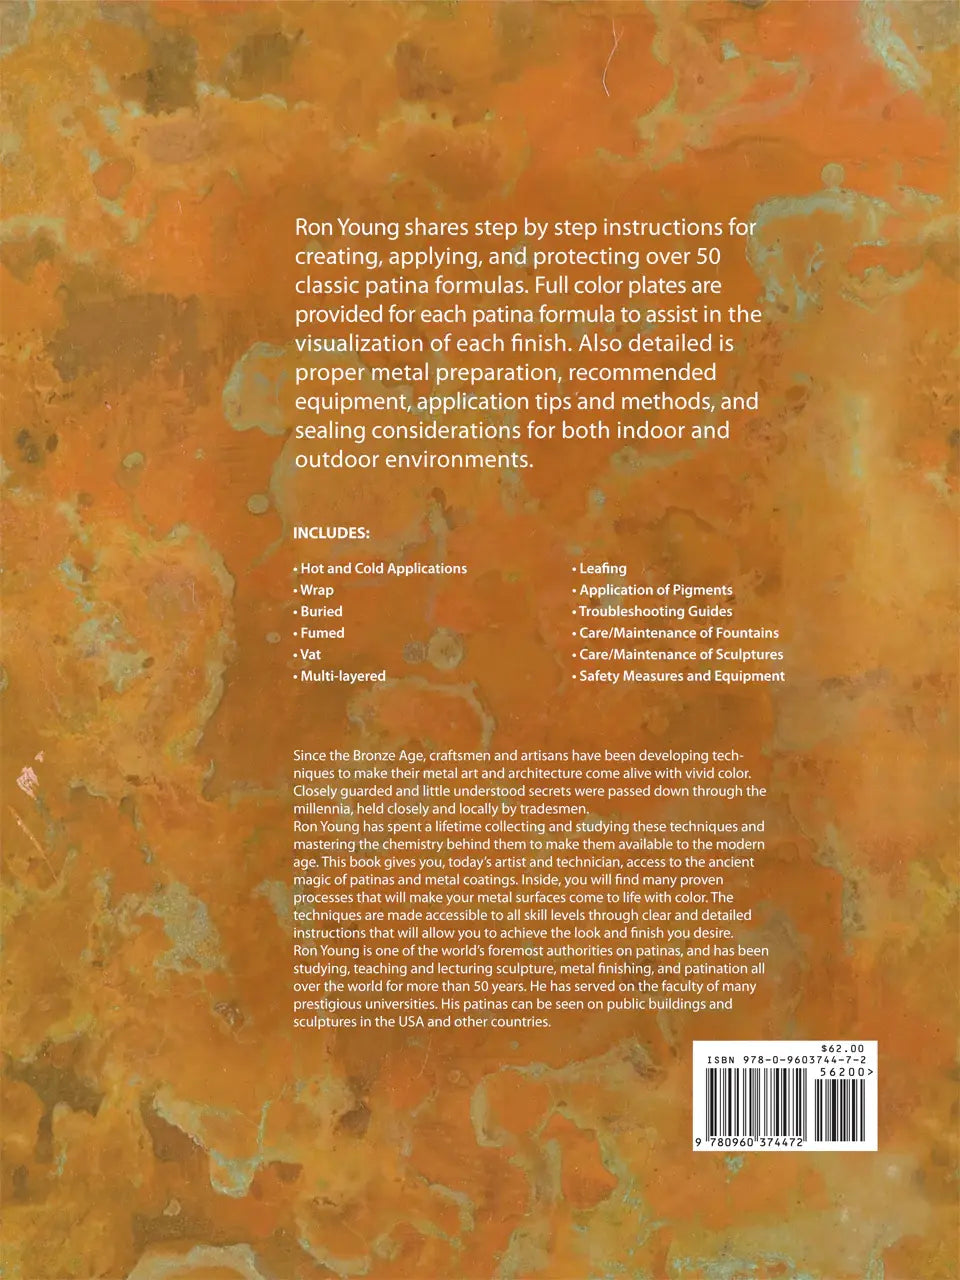 Contemporary Patination 2nd Edition Young Book